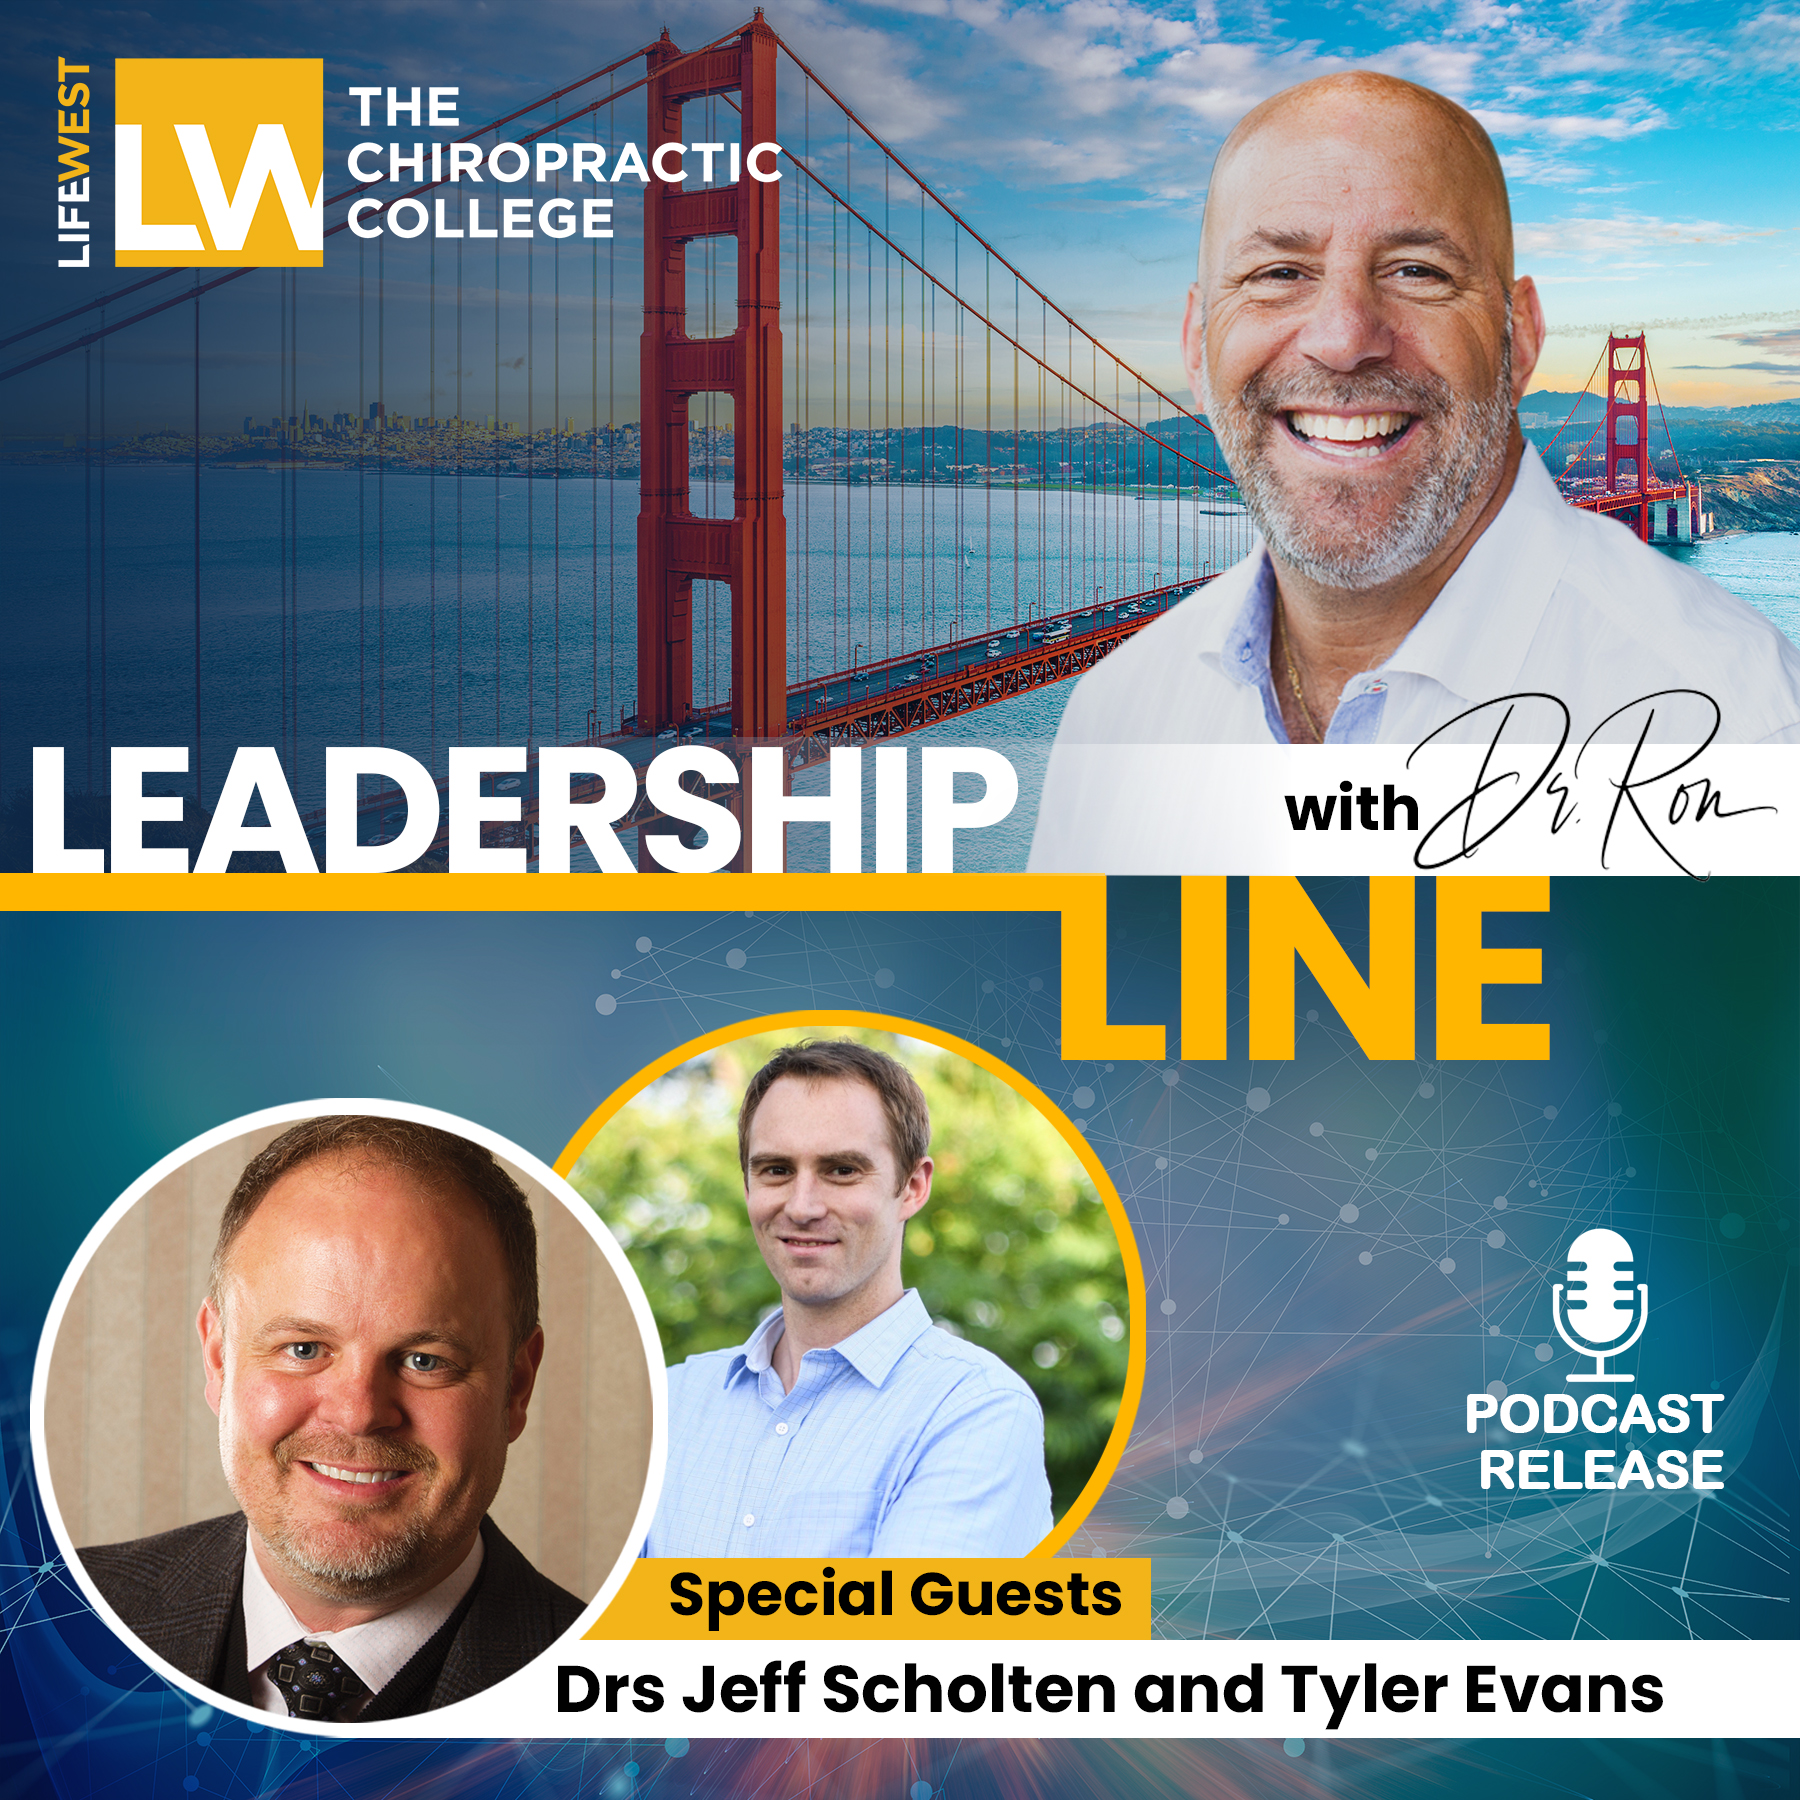 S2 Ep44 Moving Chiropractic Into the 22nd Century With Out-Of-This-World Technology with Drs. Jeff Scholten and Tyler Evans